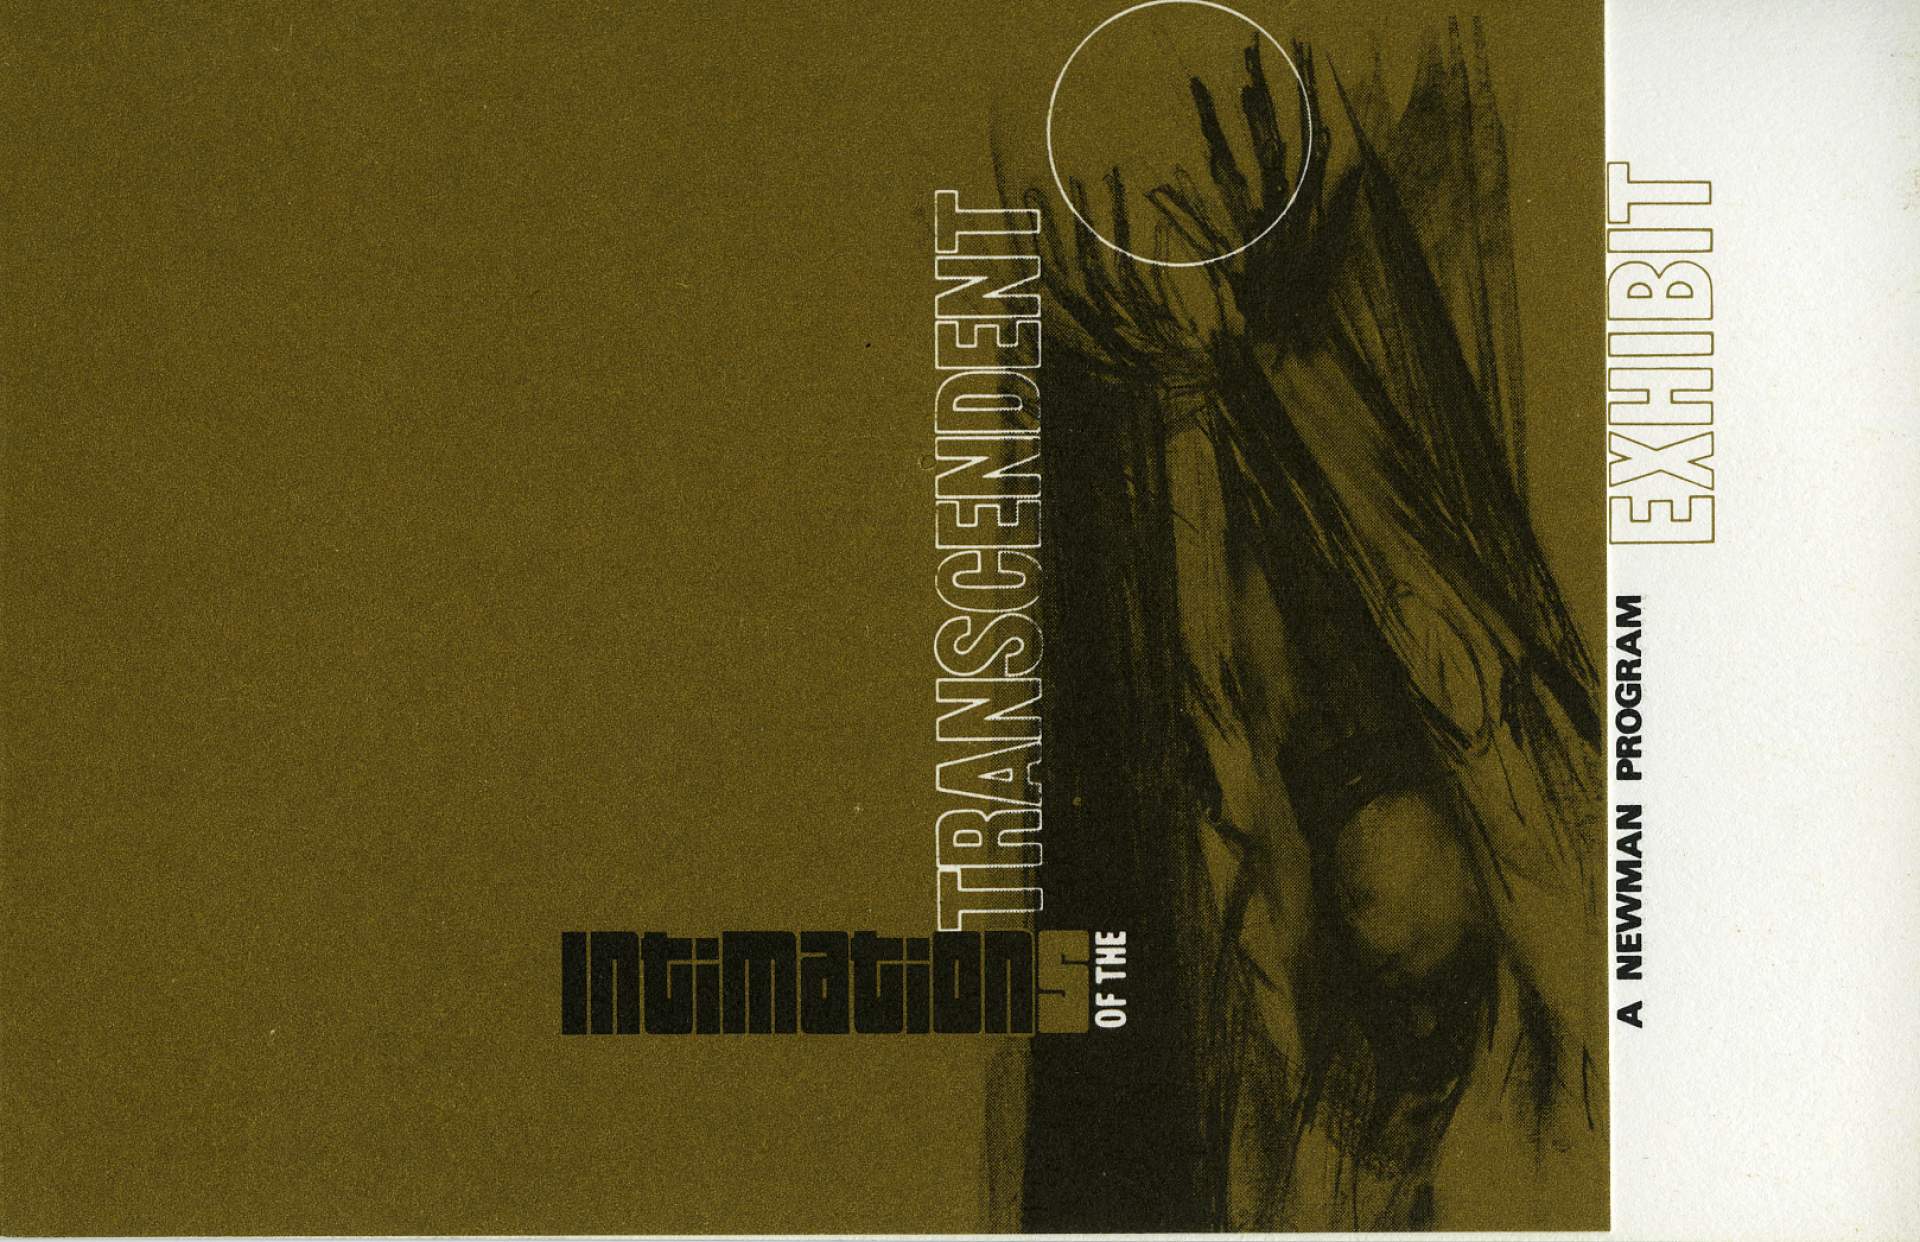 Imitations of the Transcendent: A Newman Program Exhibition invitation cover